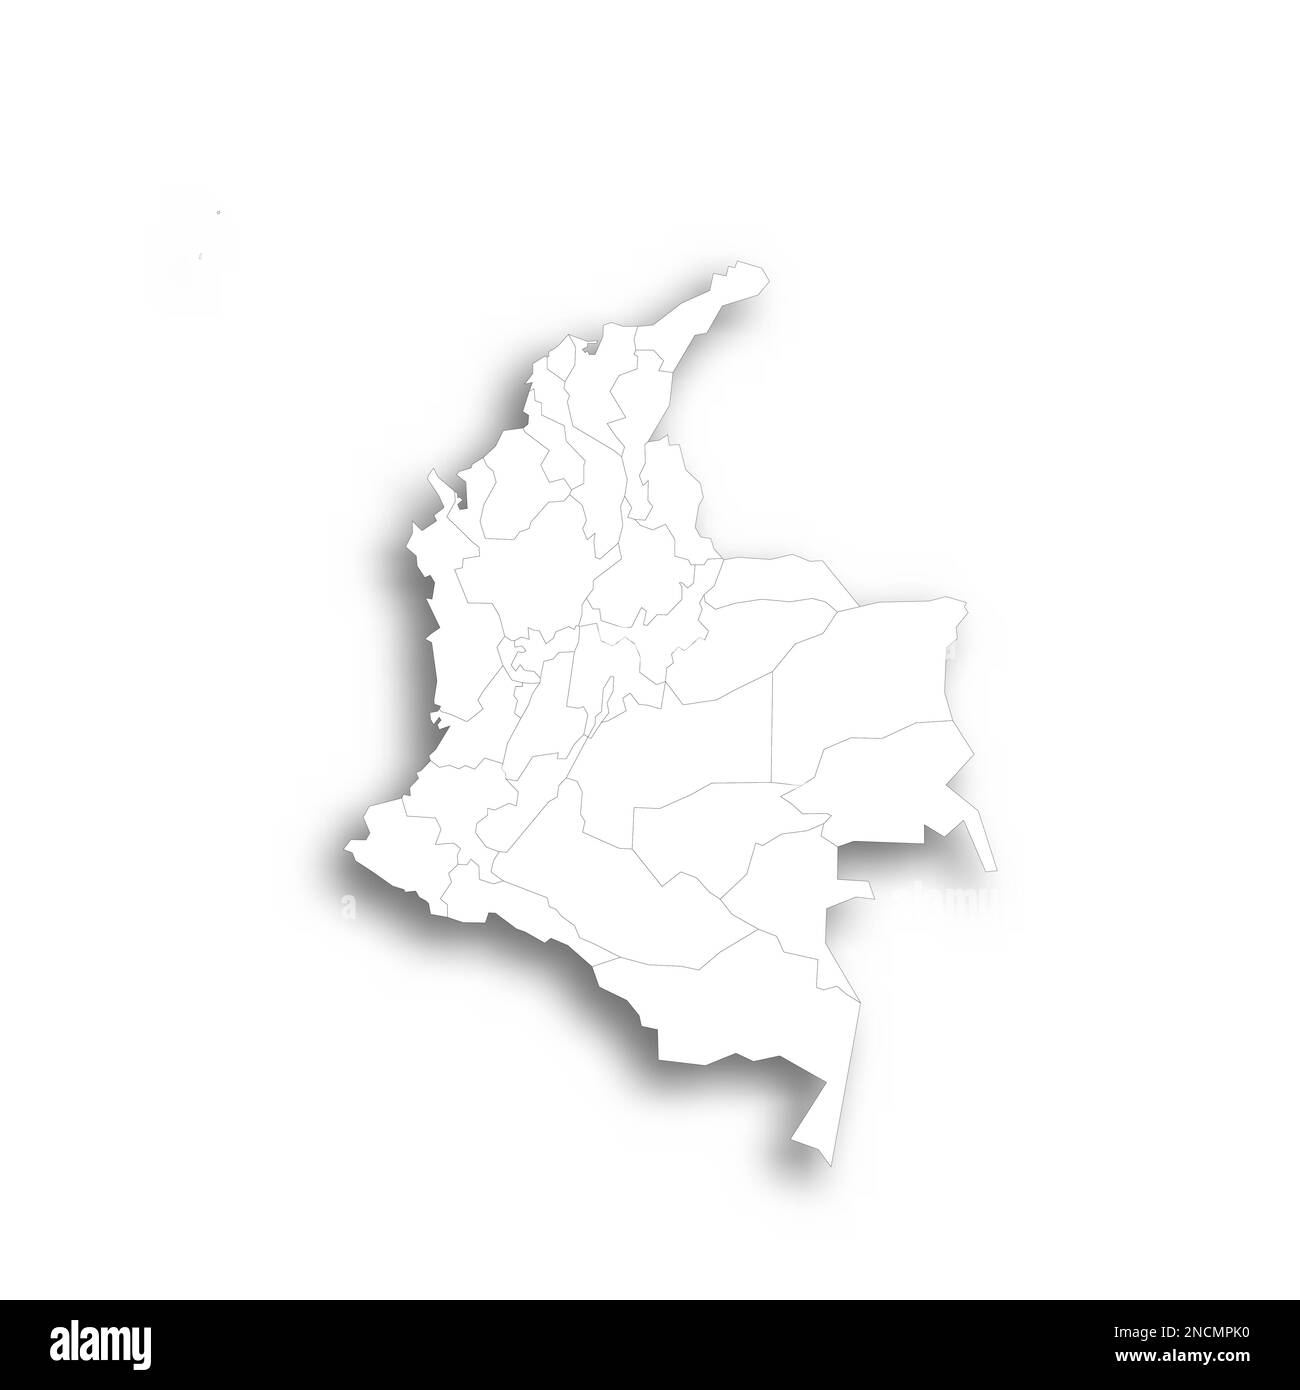 Colombia political map of administrative divisions - departments and capital district. Flat white blank map with thin black outline and dropped shadow. Stock Vector